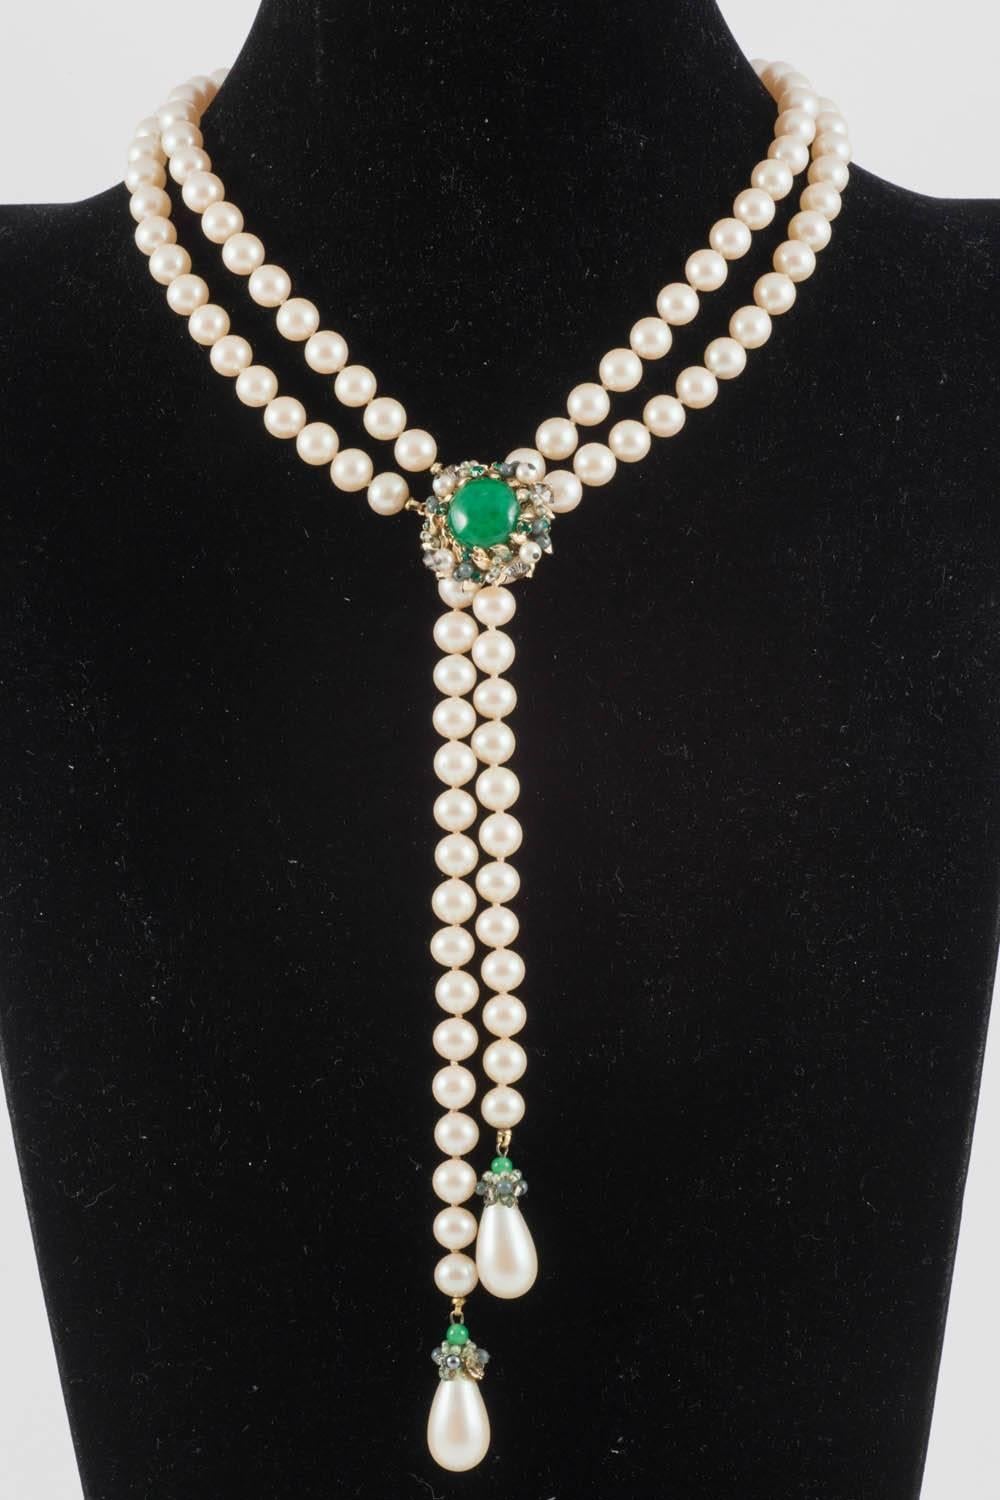 A very smart and elegant faux pearls necklace and matching earrings from Vendome, during the 1960s. The central button on the pearl necklace opens and can be placed up and down the double row, to make the necklace longer or shorter, a useful and